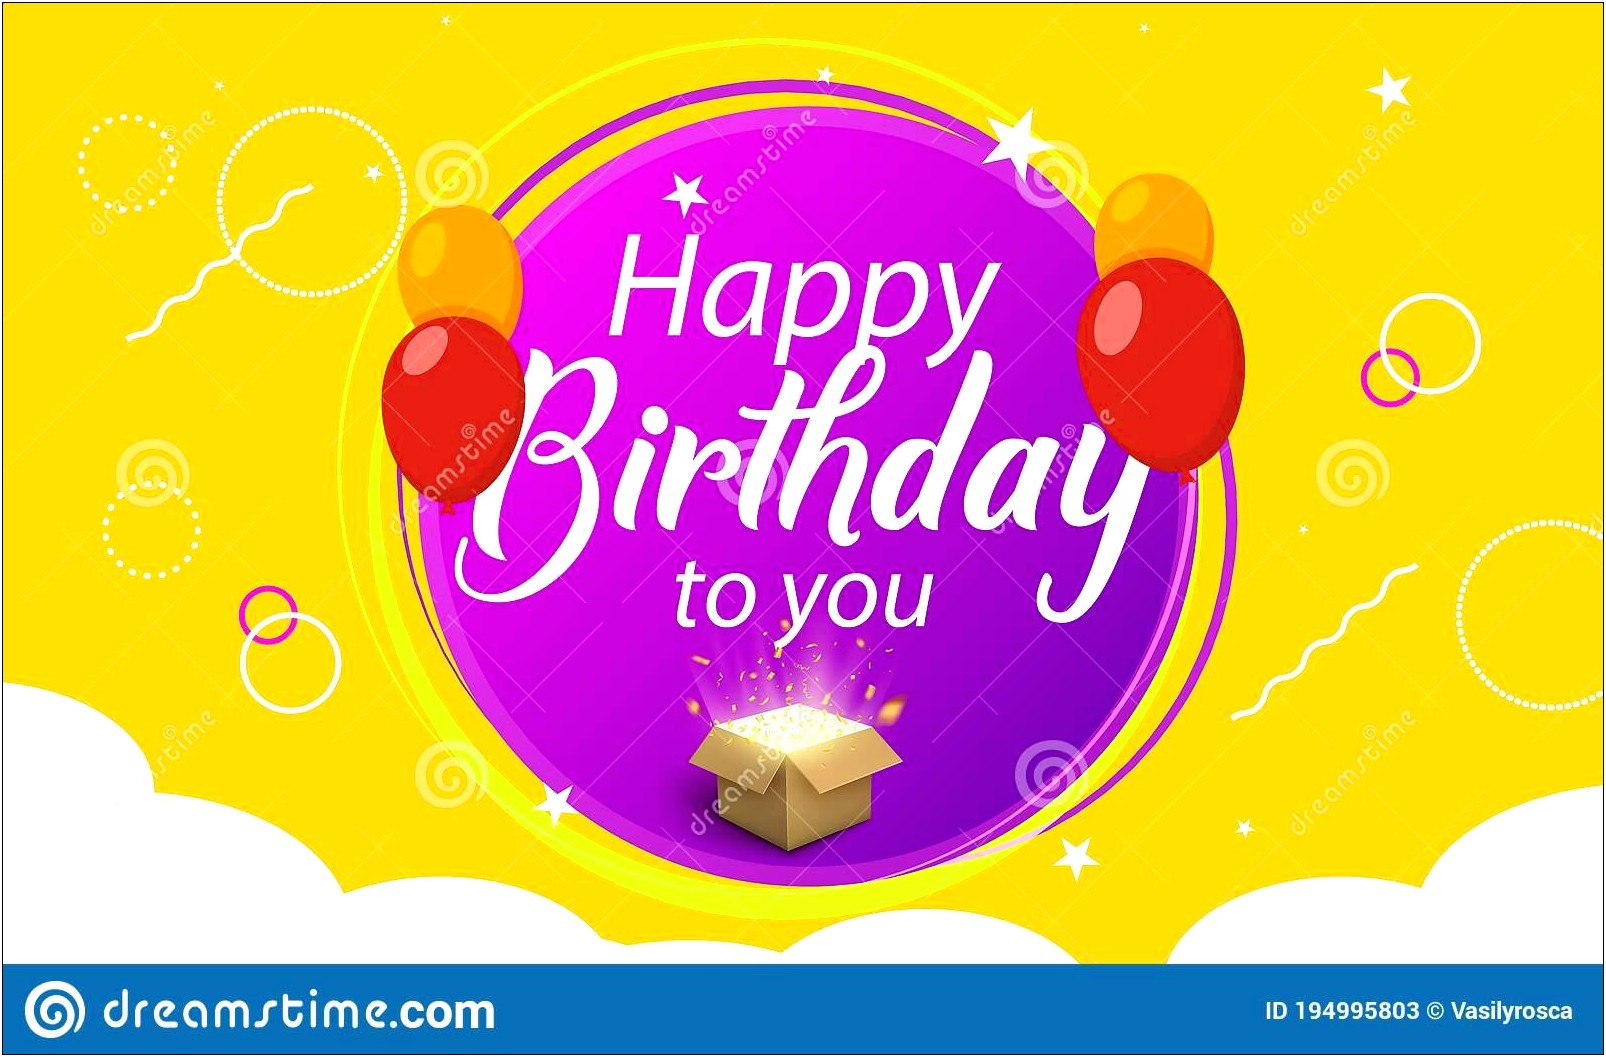 Birthday Poster Design Template Free Download